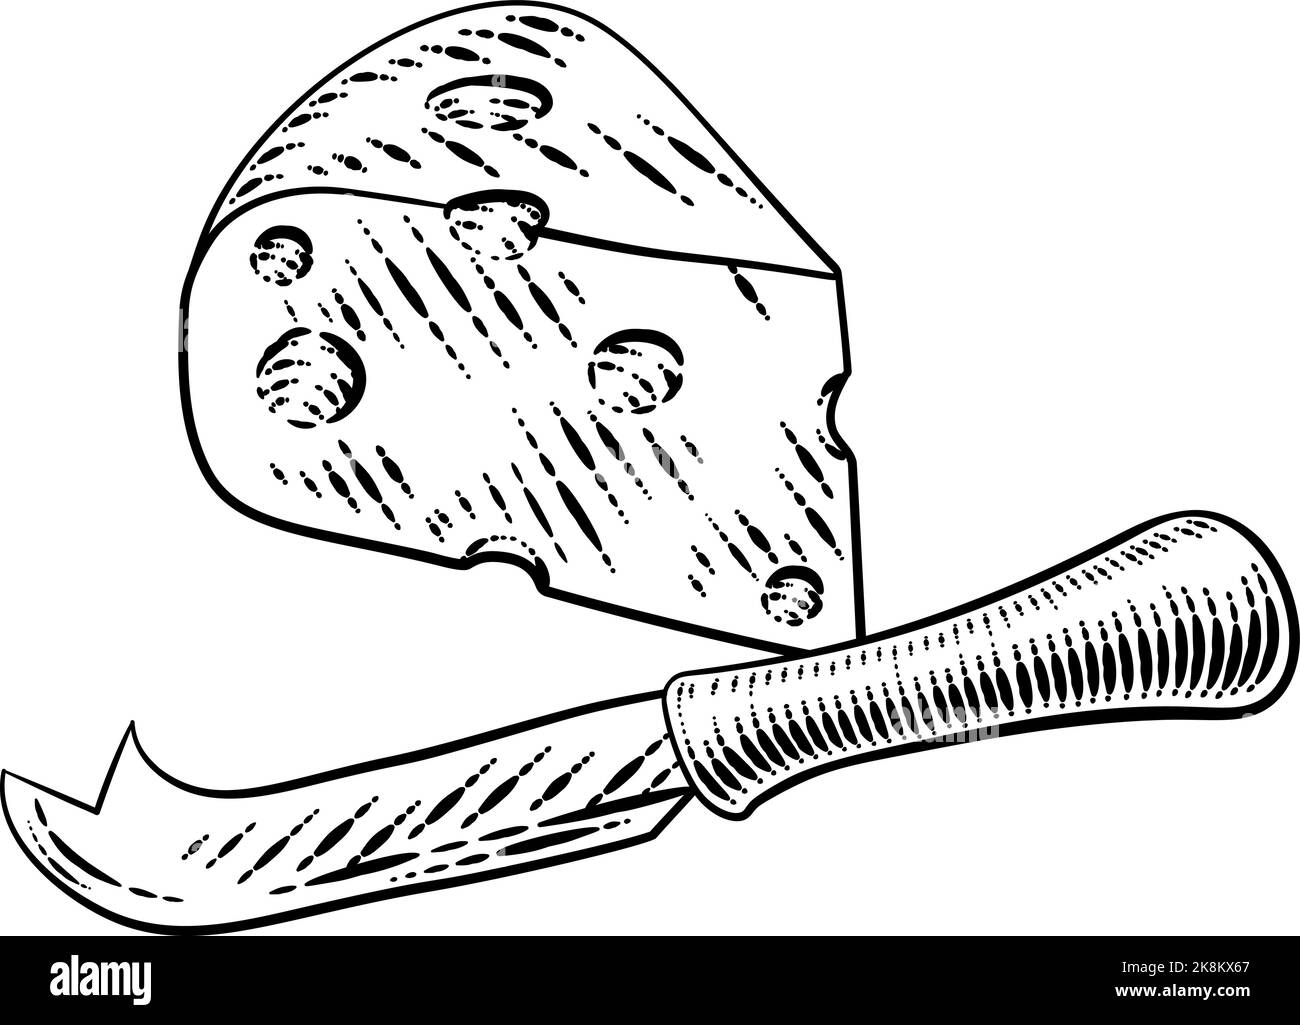 Wedge of Swiss Cheese Knife Vintage Woodcut Style Stock Vector